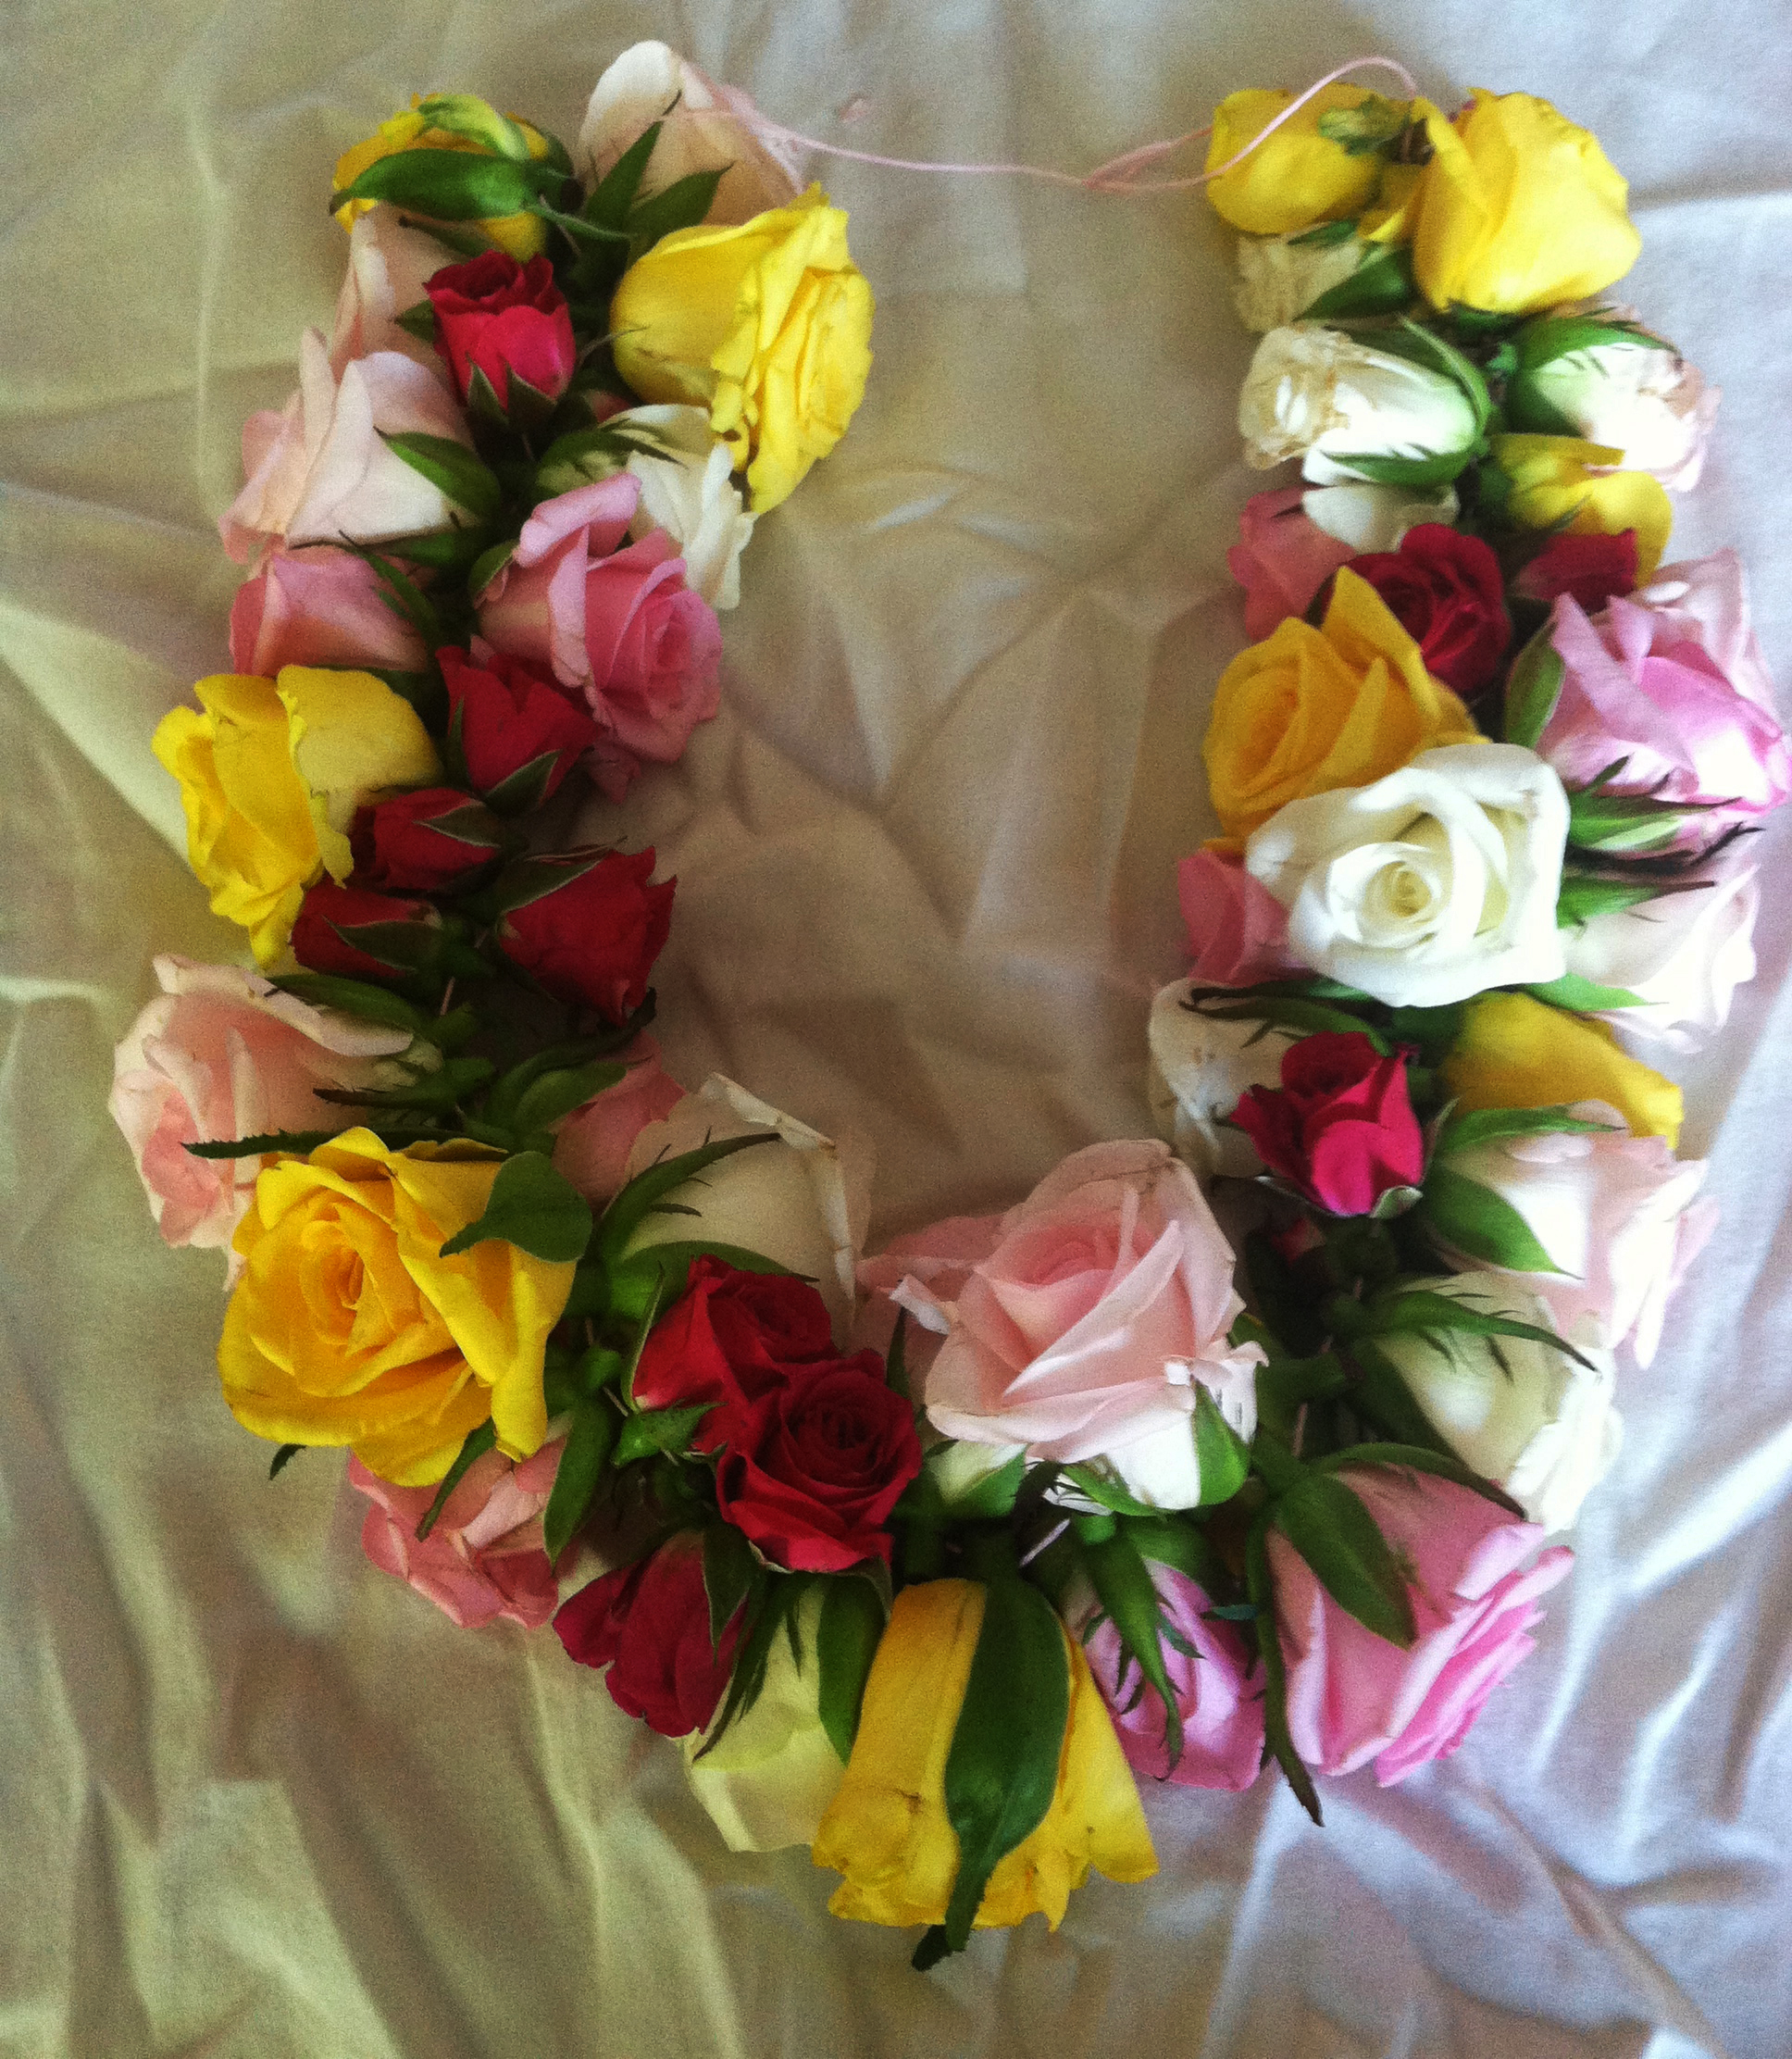 How To Make a Lei : A Fresh Flower Lei With Roses | Go Hippie Chic